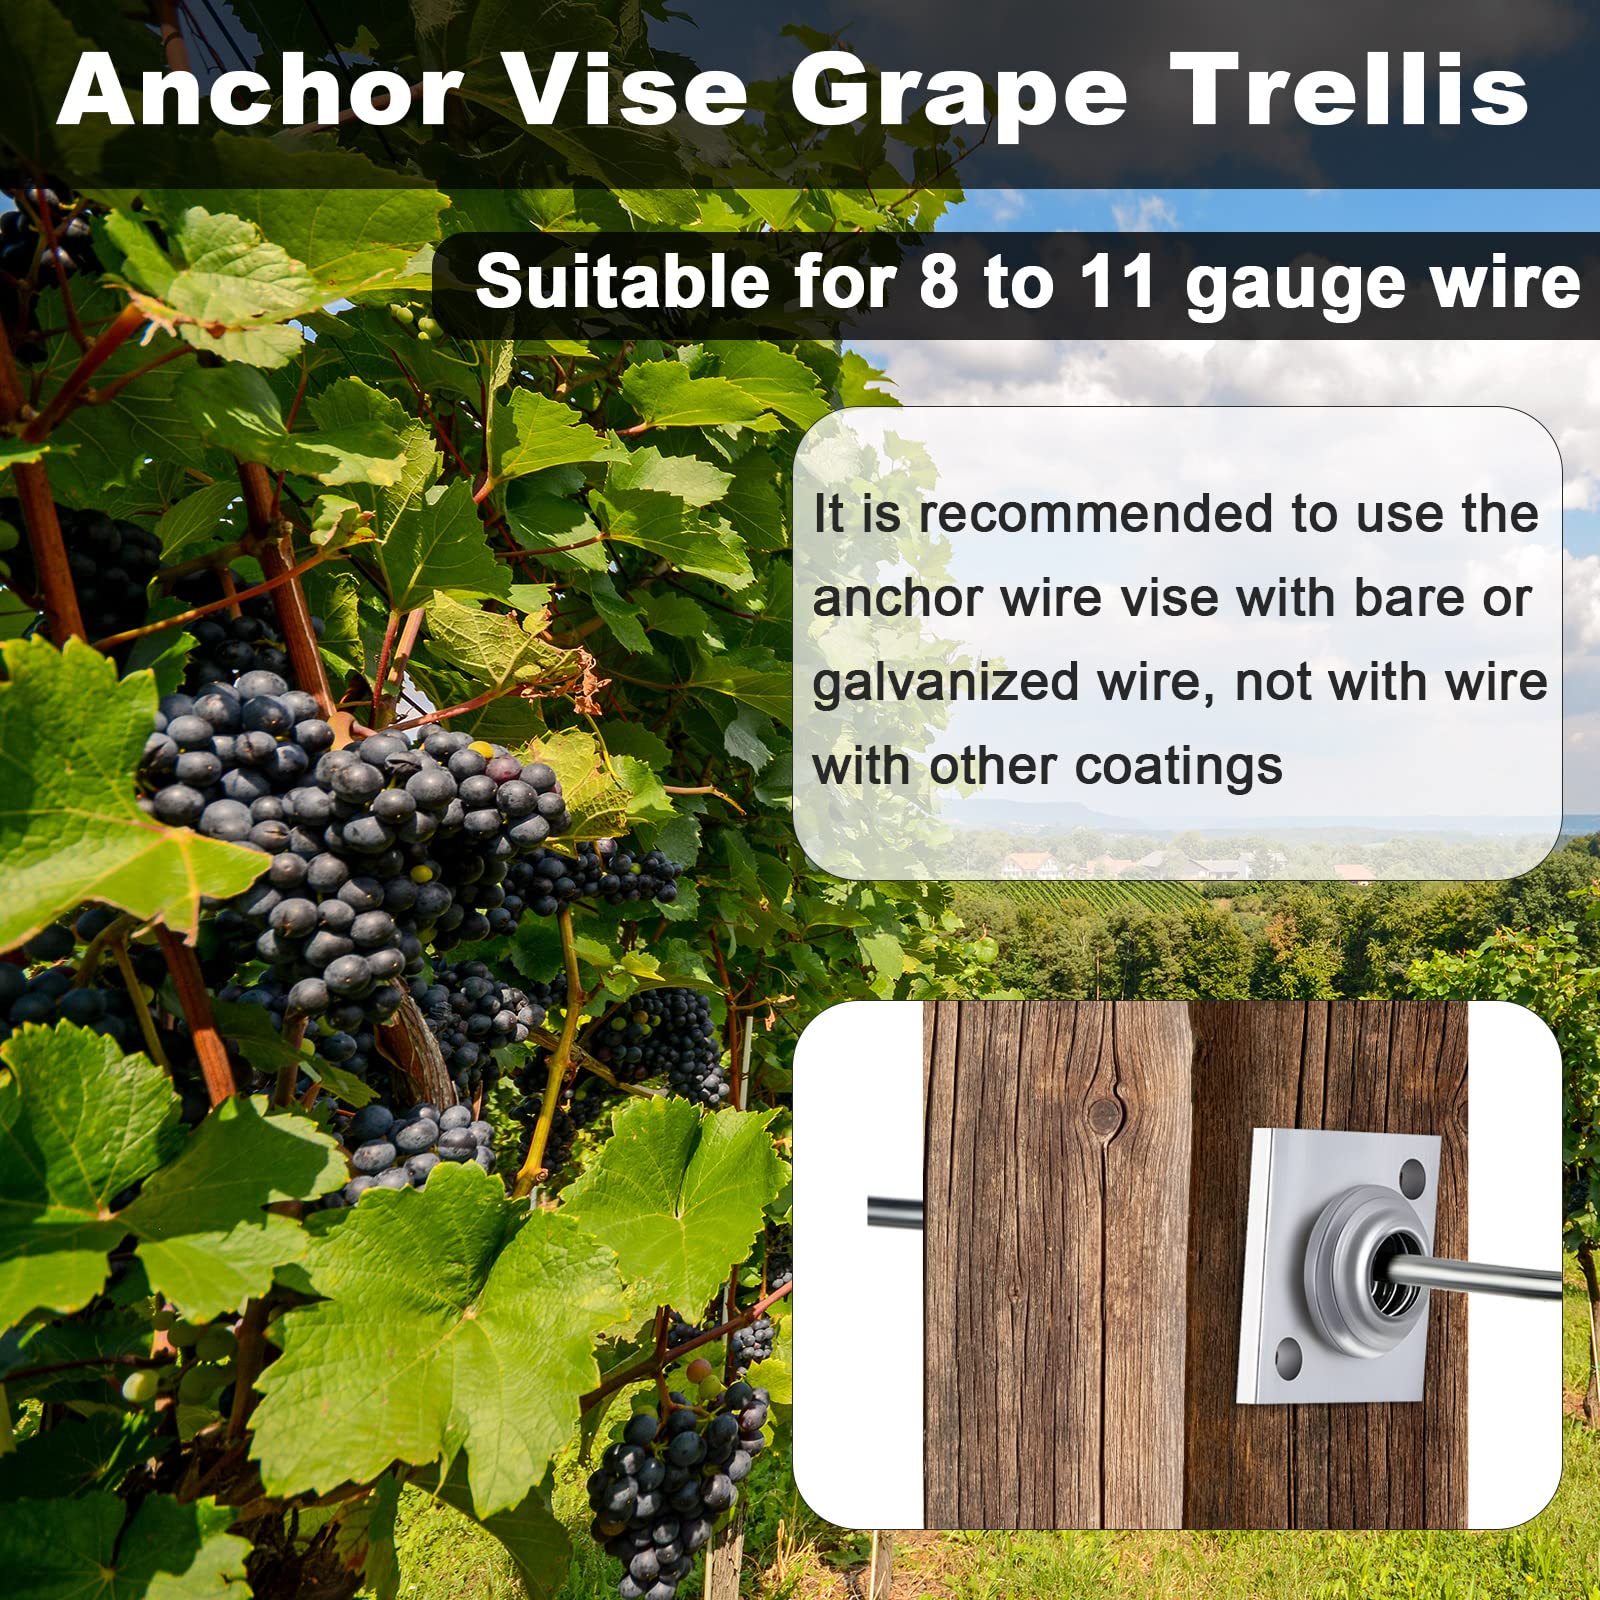 Anchor Wire Vise Anchor Vise Grape Trellis Anchor Vise for Tightening 8~11 Gauge Wire to Build Trellises, Vineyards, Fences and Arbors (5 Pieces)